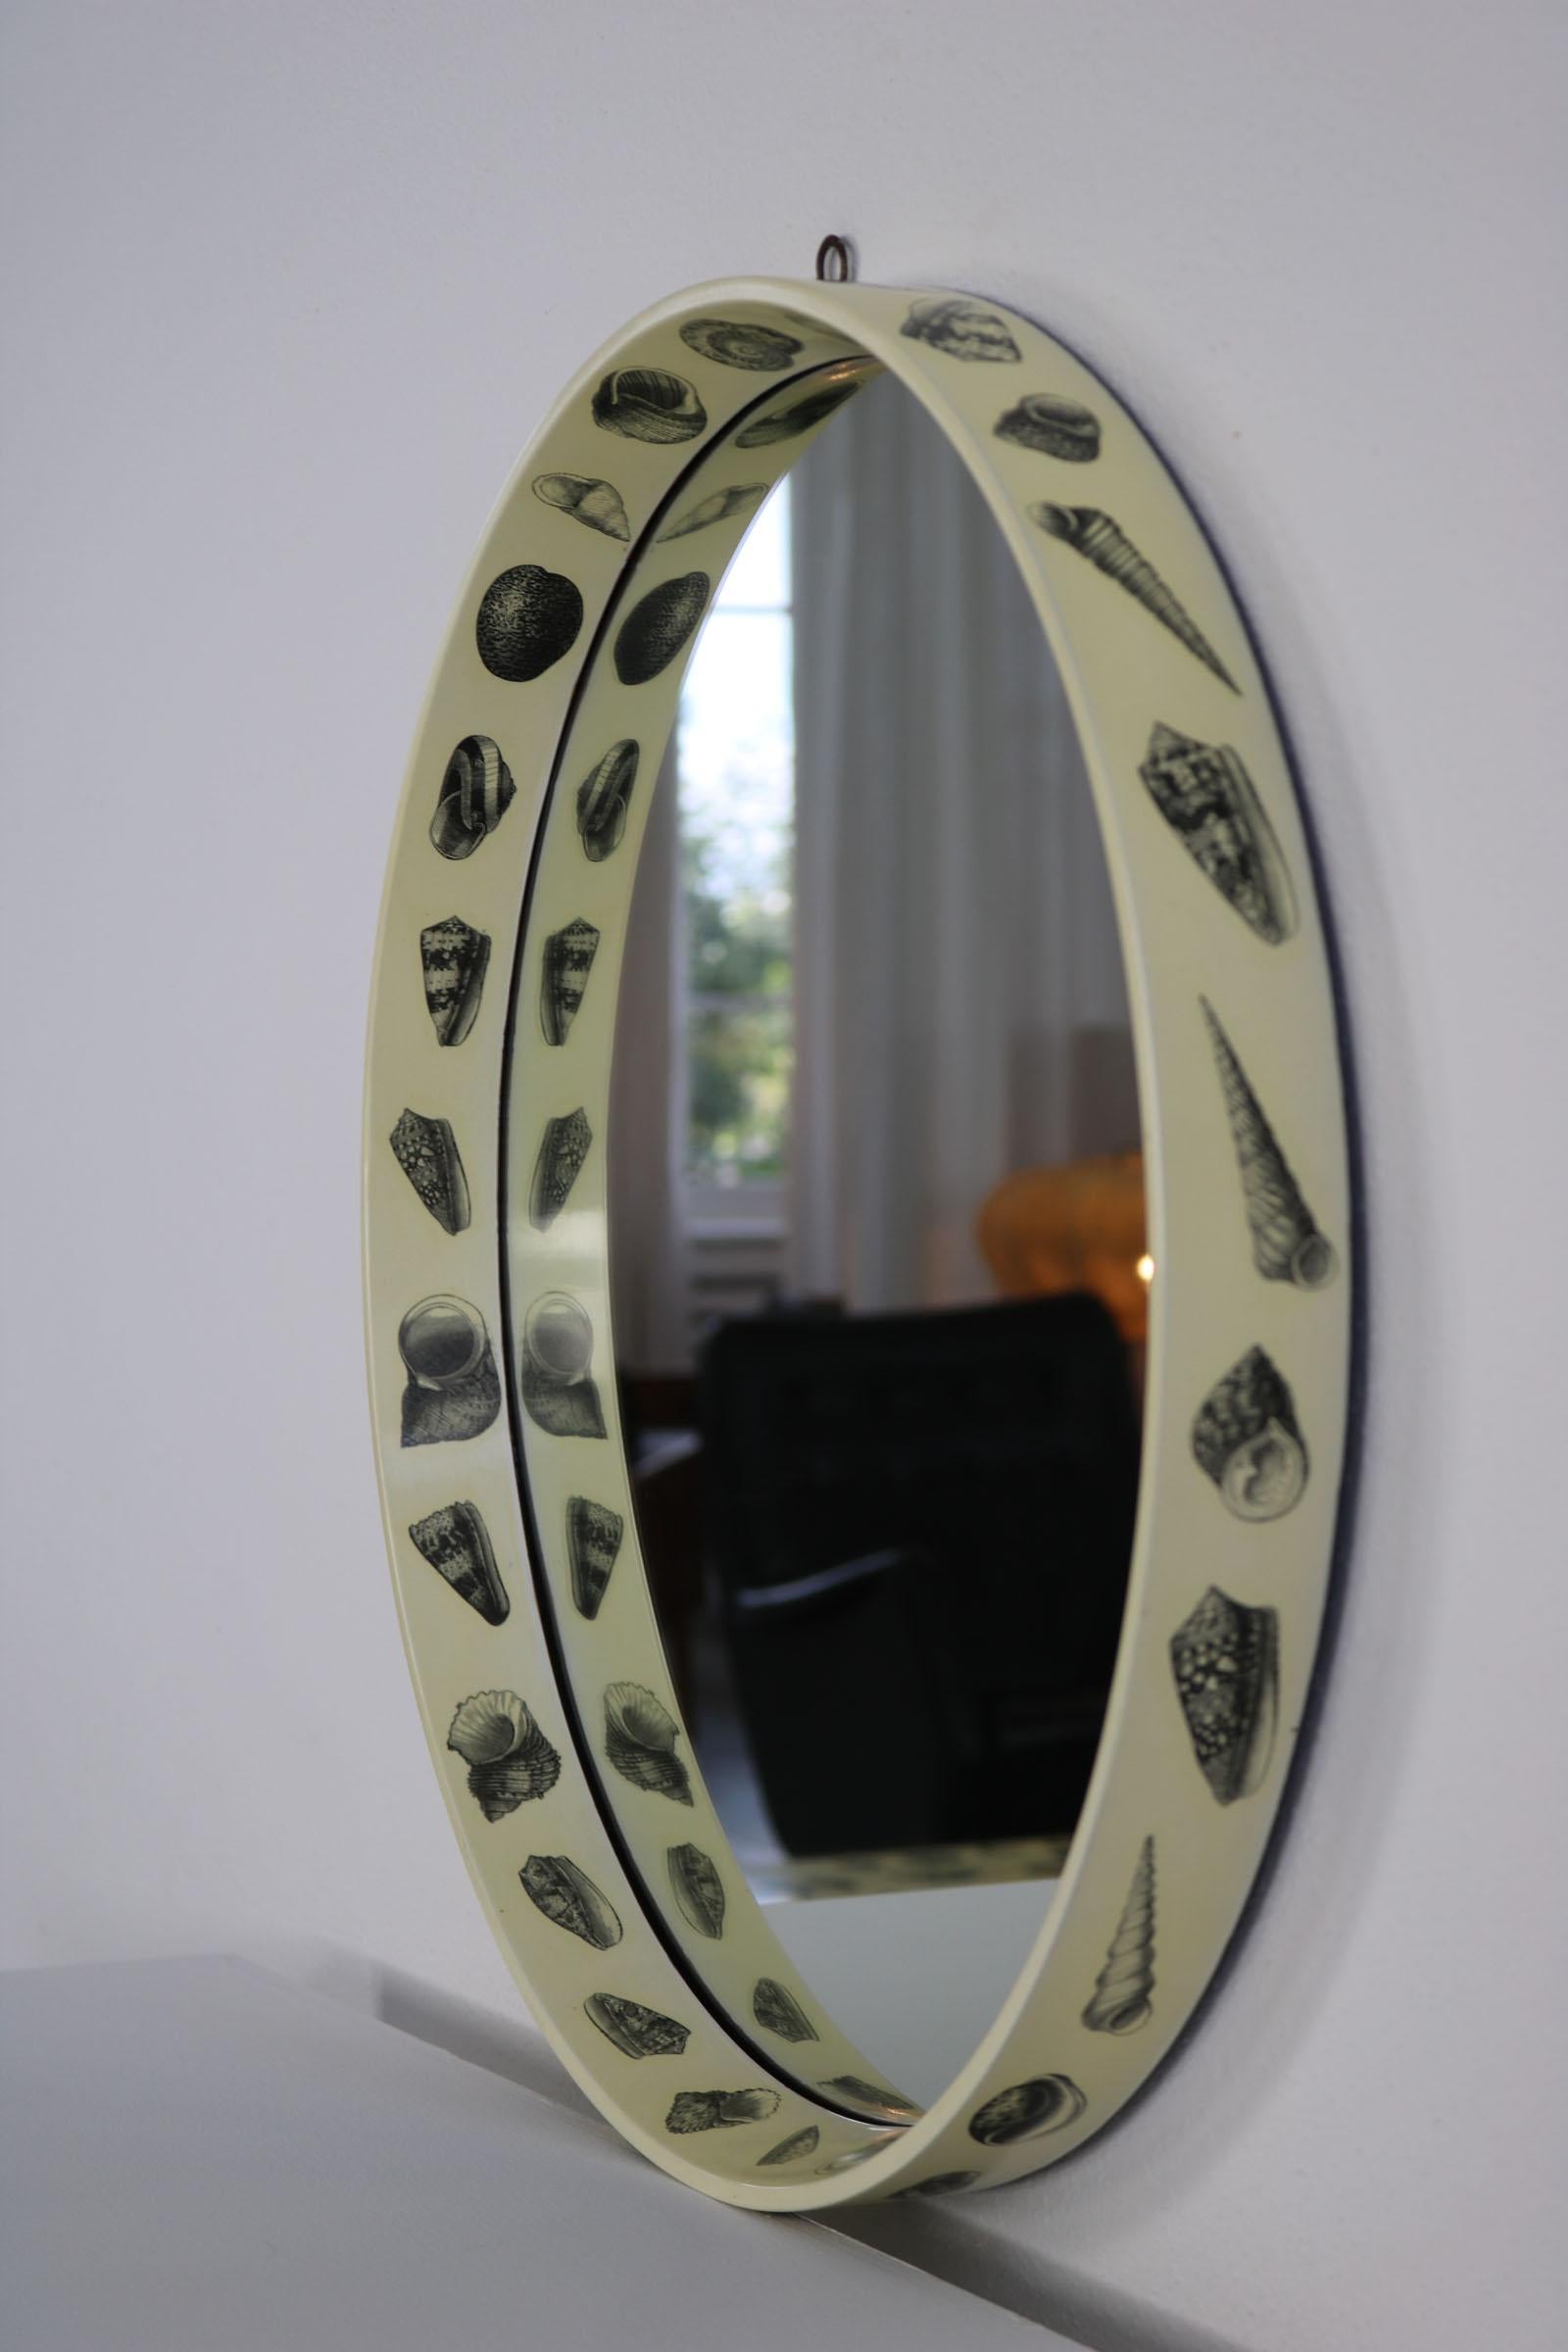 Circular Mirror in the Manner of Fornasetti, from Italy 1950 For Sale 4